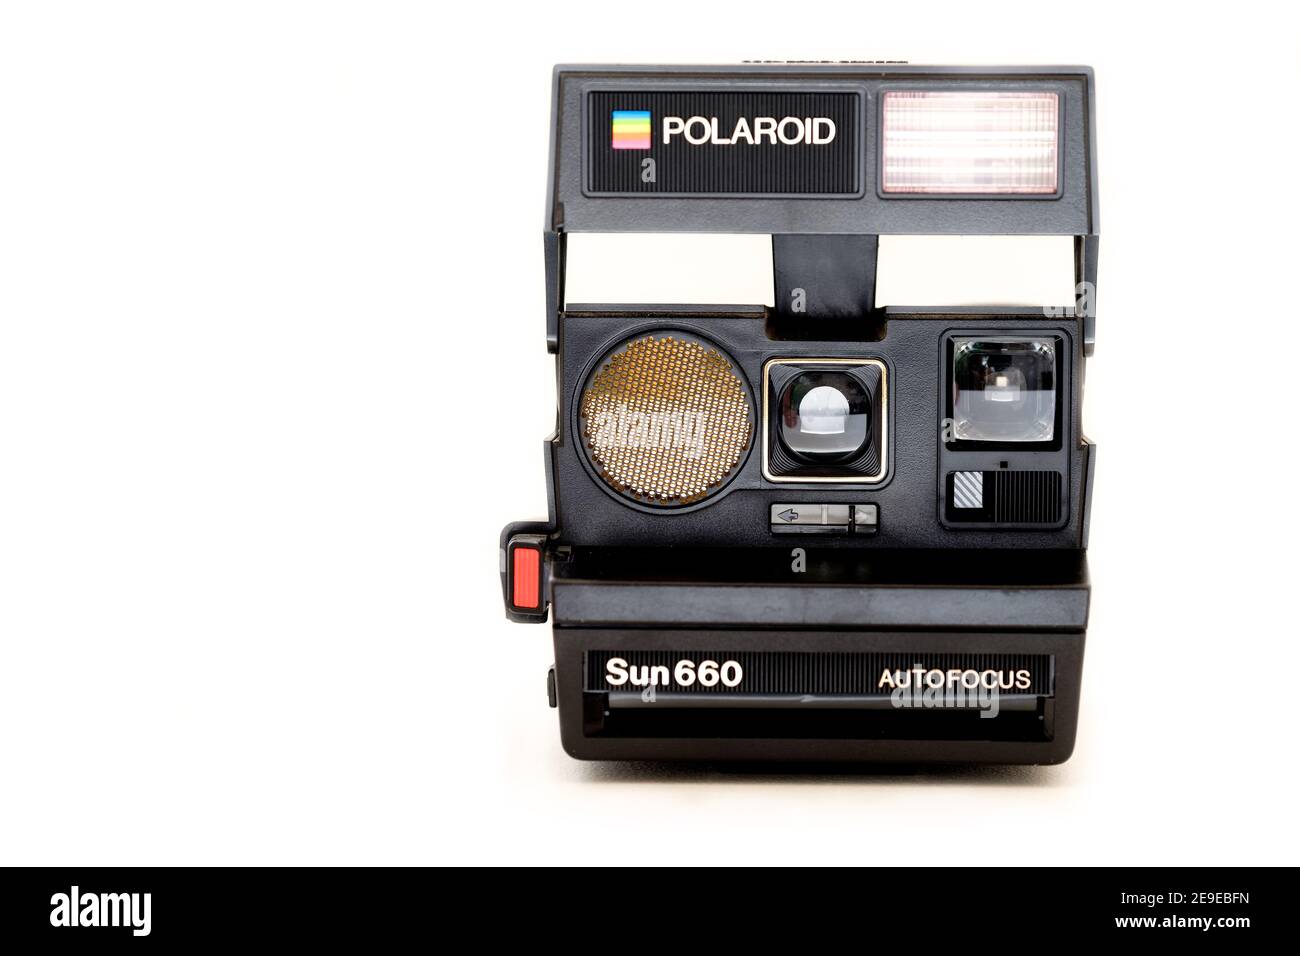 An original Polaroid sun 660 instant camera. The iconic 1980’s instant camera is shown fully open an shot against a Pali white background Stock Photo